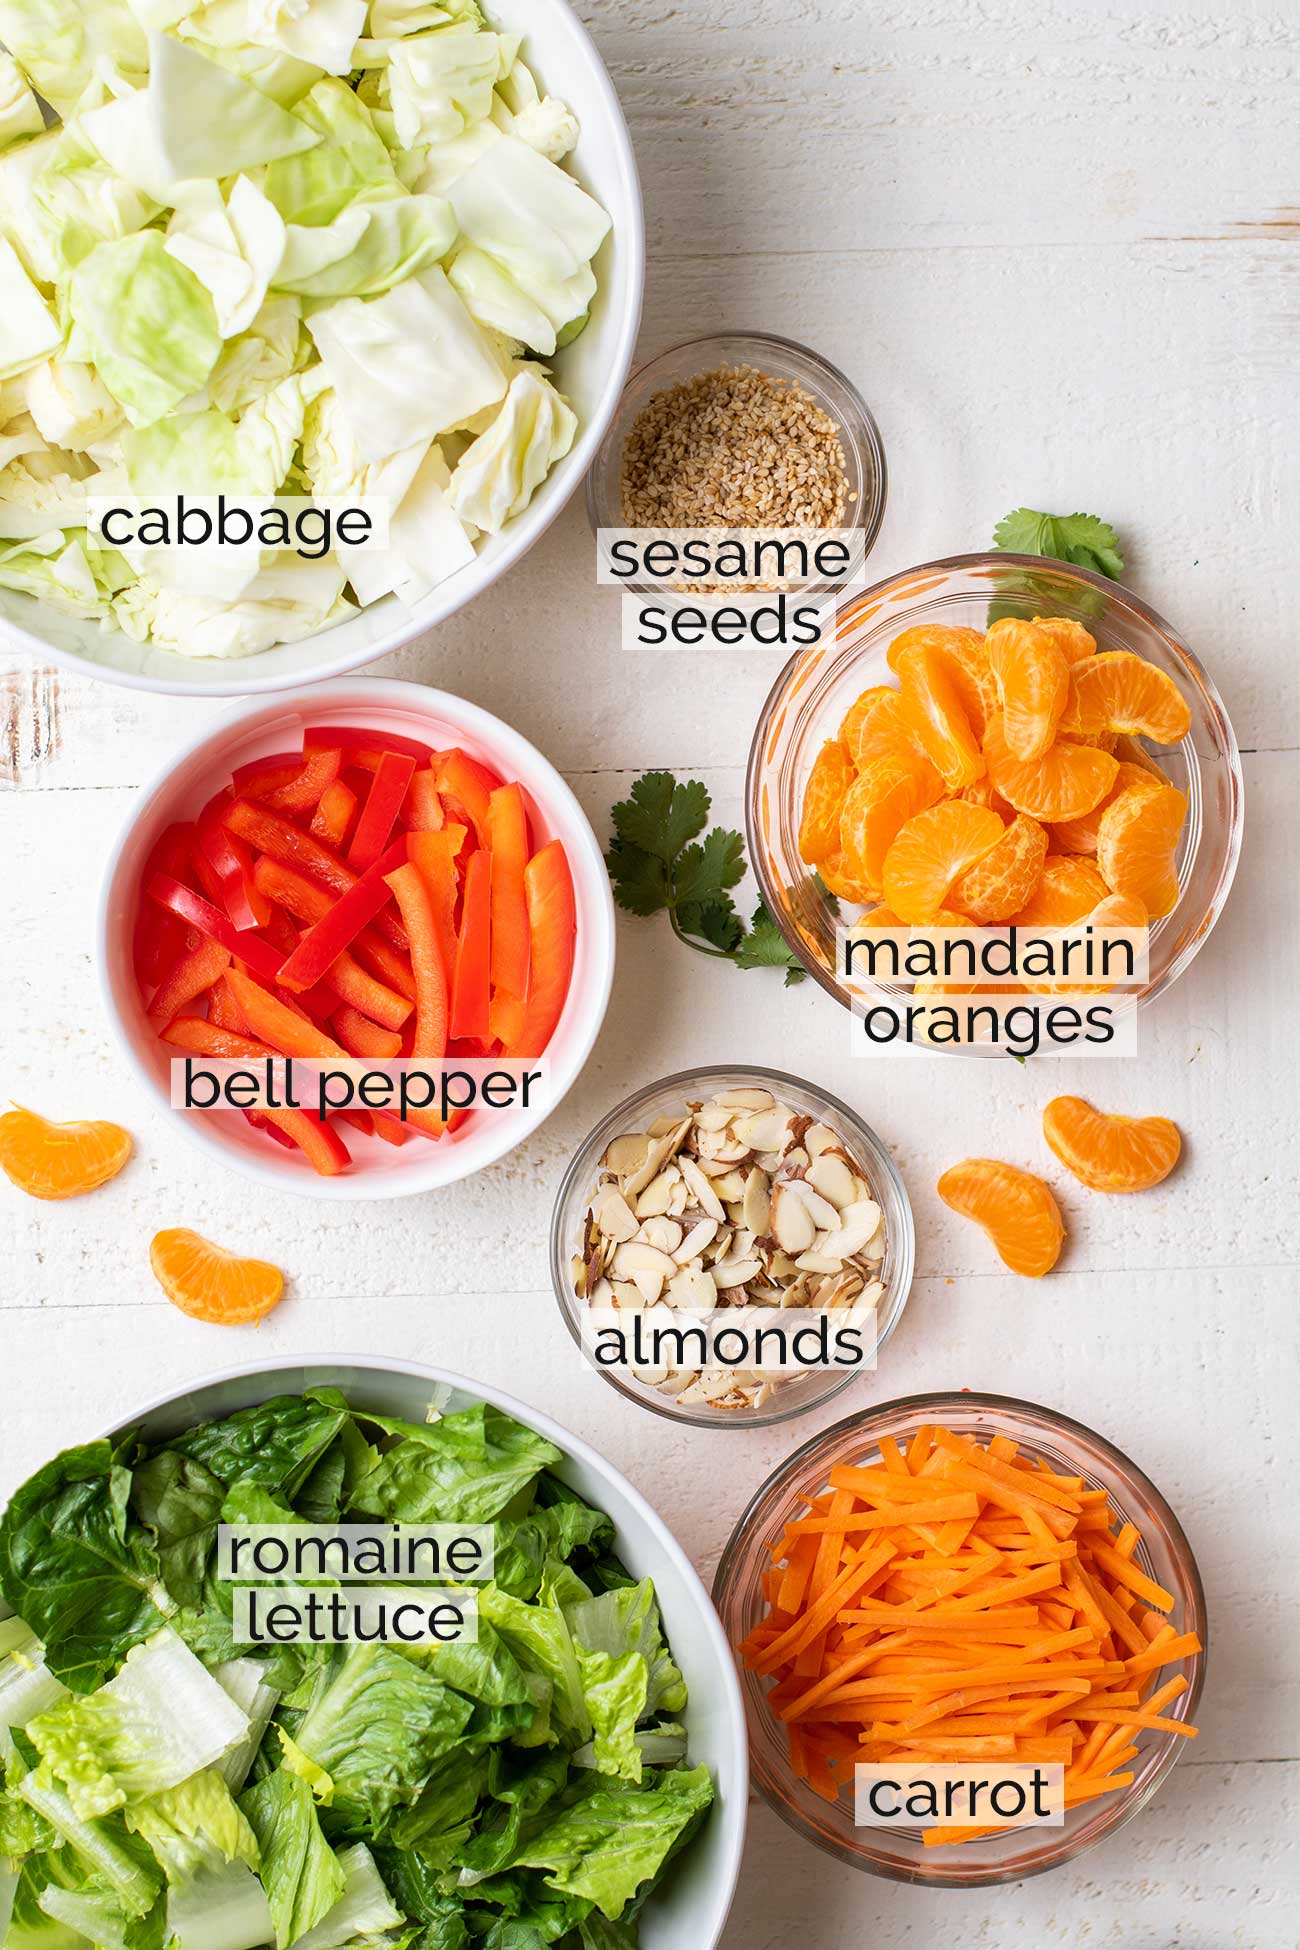 The ingredients for this cabbage salad shown chopped and in bowls, ready to combine.